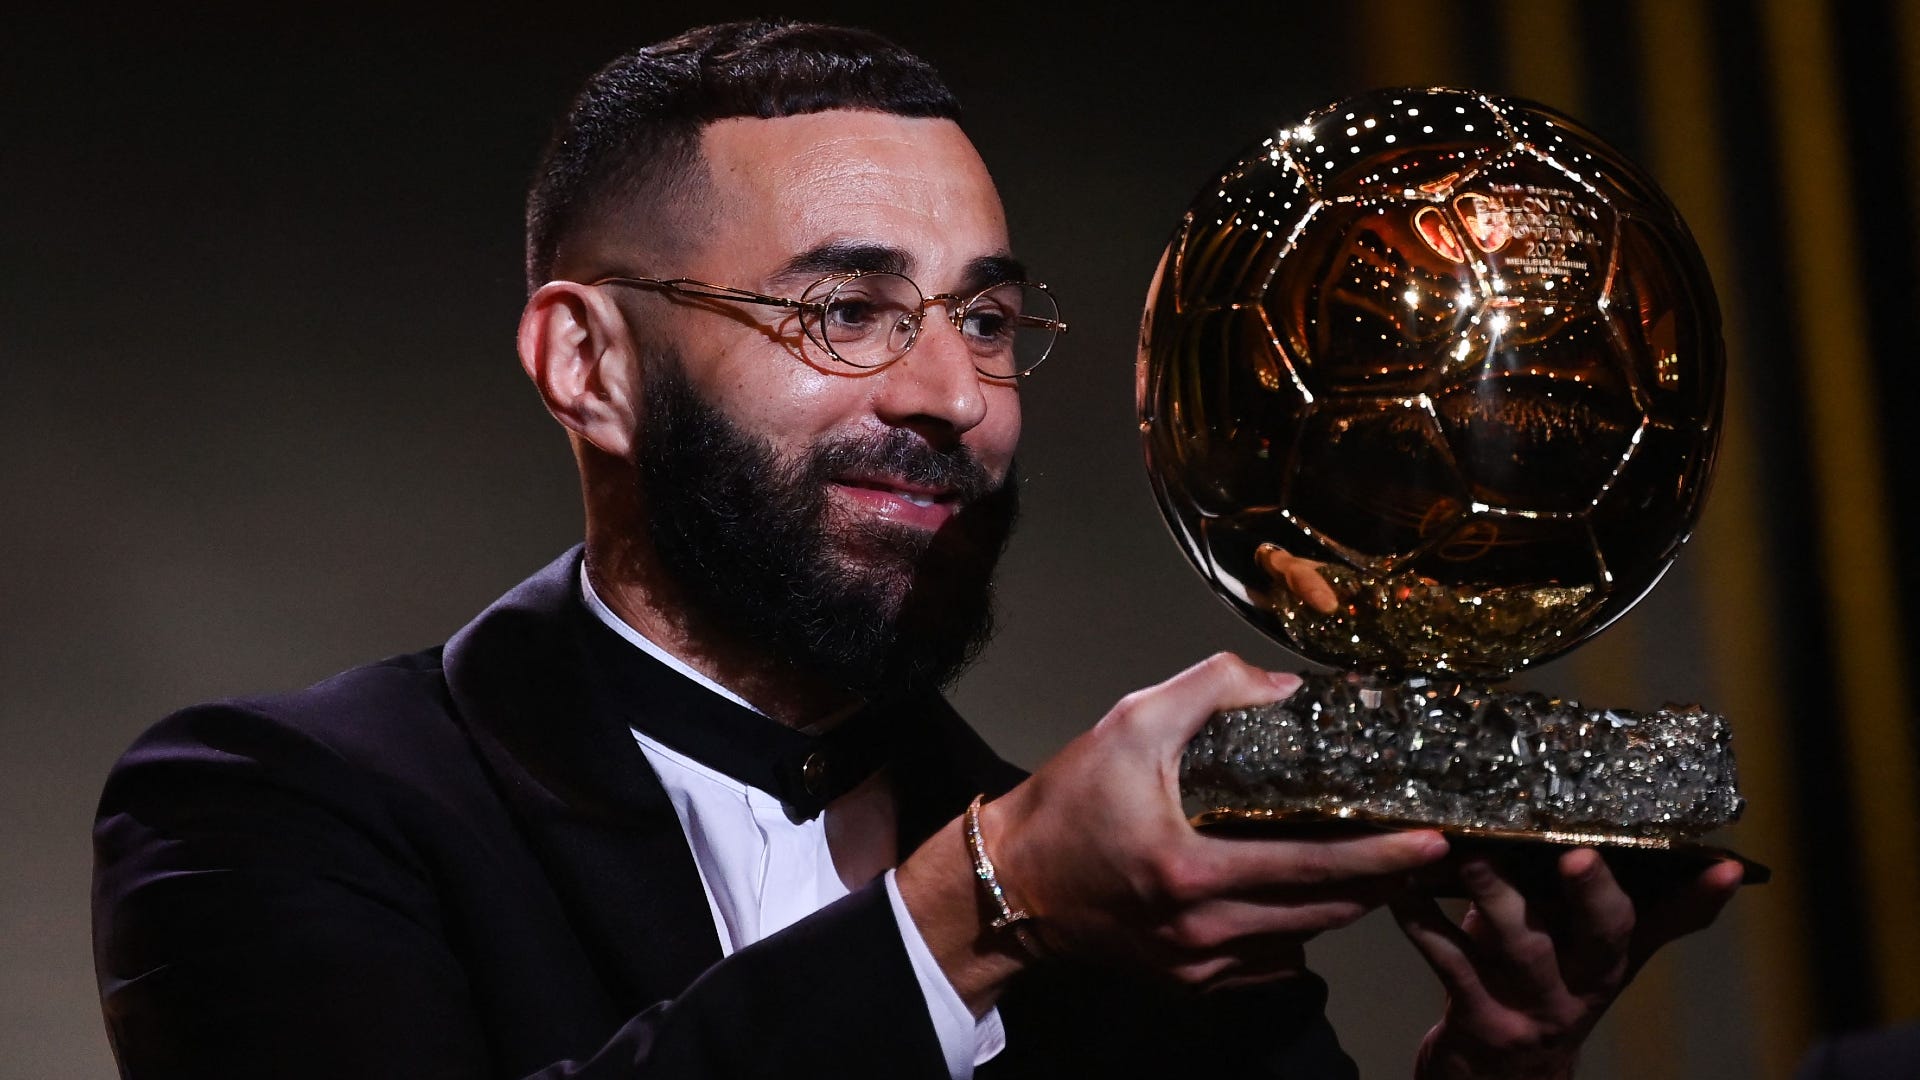 Benzema crowned the 2022 Ballon d’Or winner after leading Real Madrid